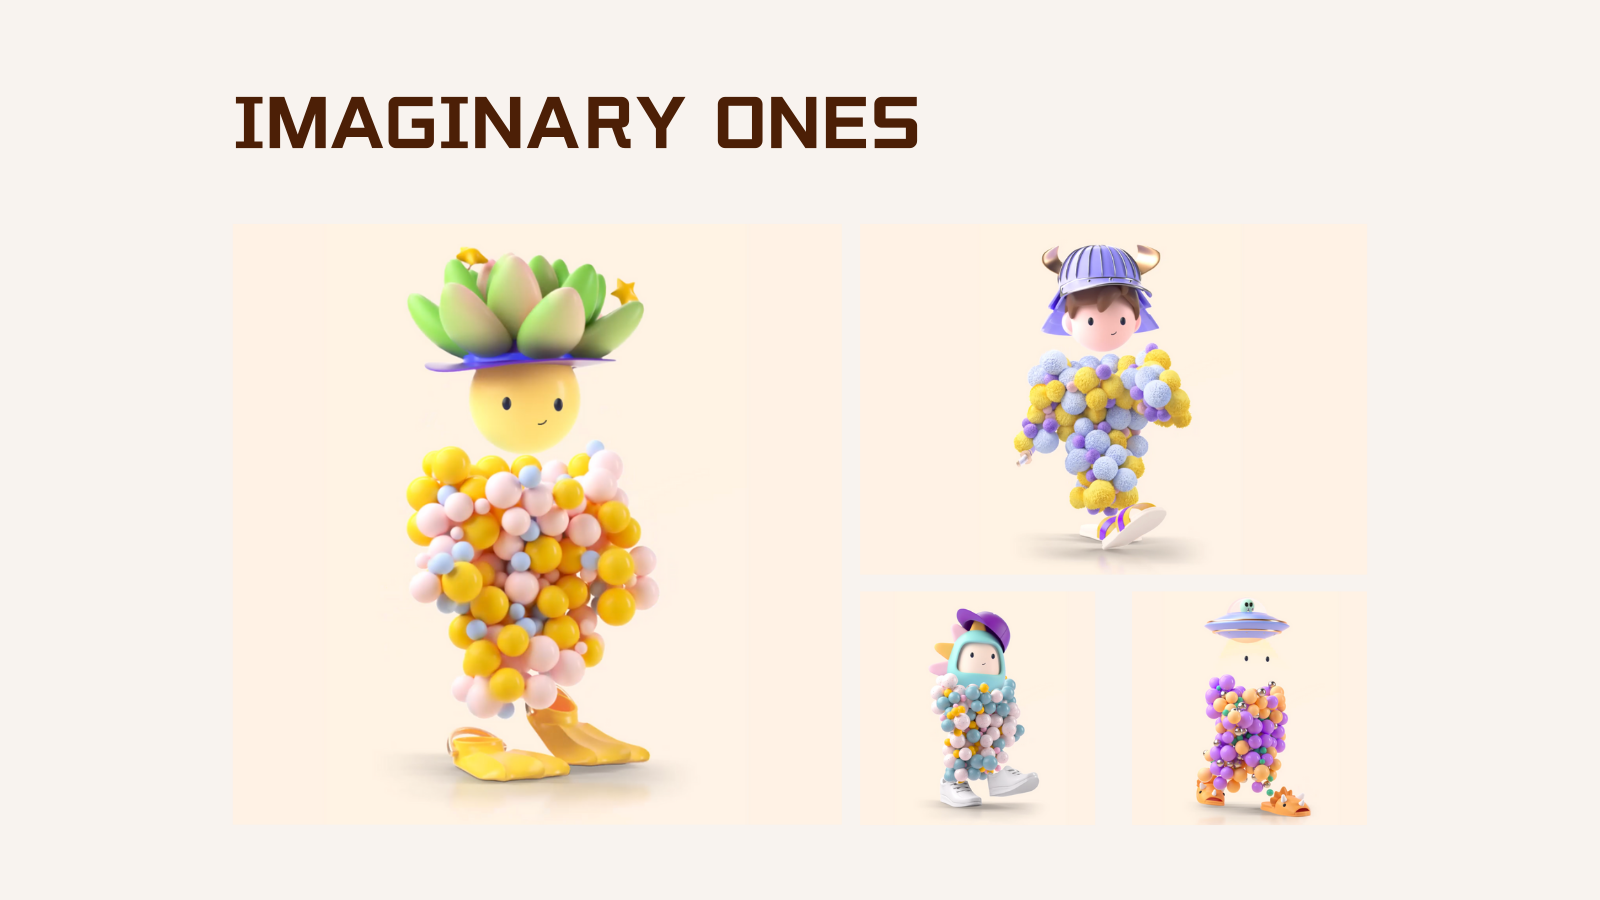 24小时NFT速递：3D动态NFT项目Imaginary Ones开启铸造